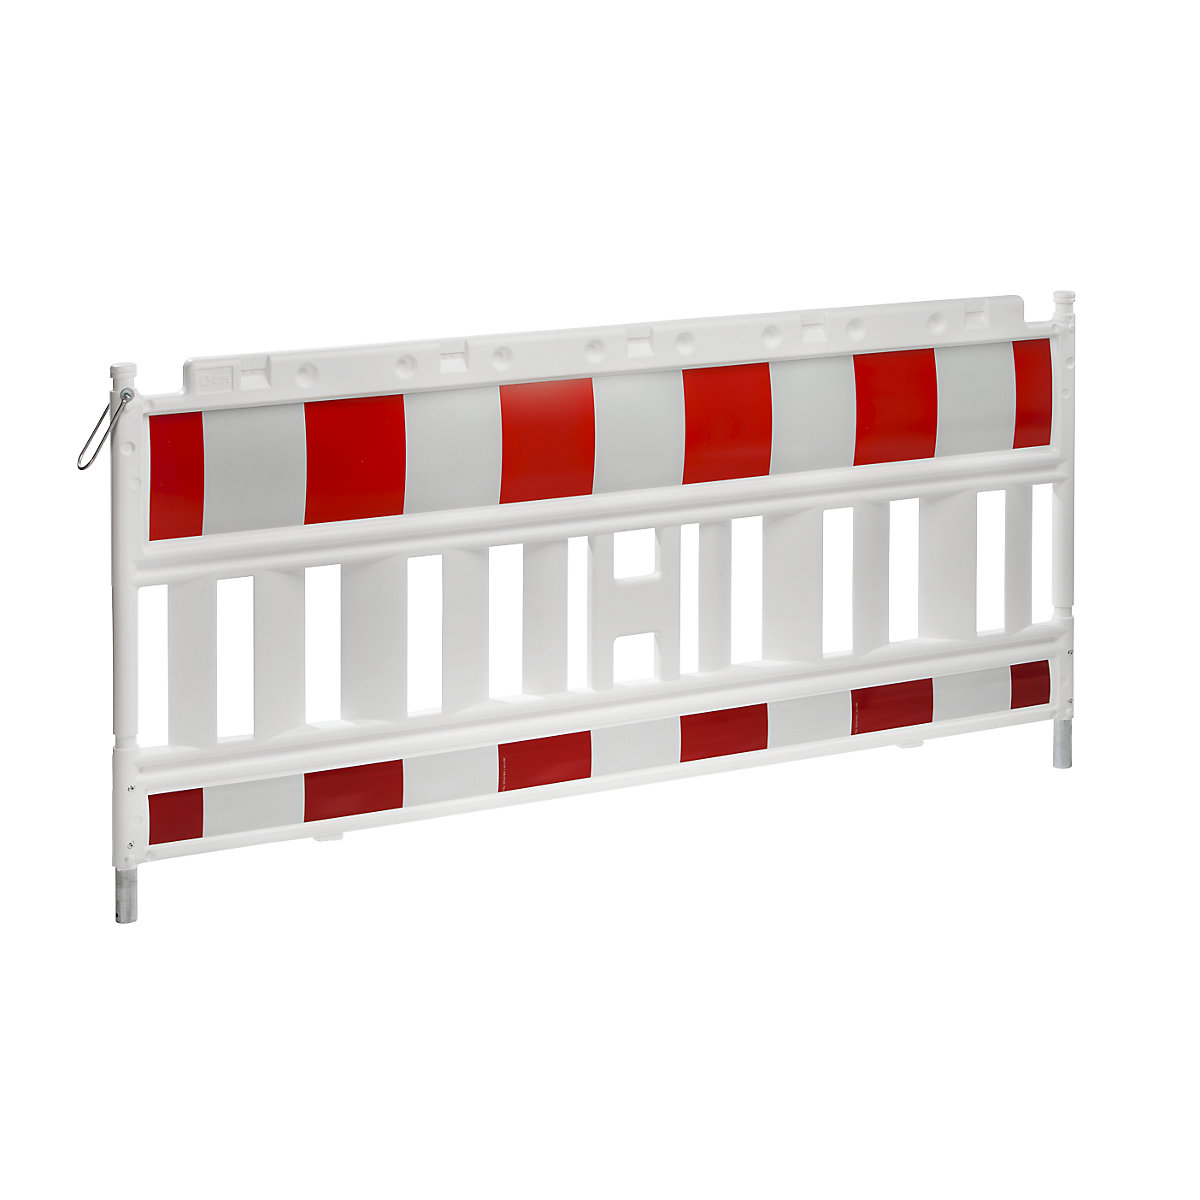 Plastic barrier fencing with reflective film - Schake